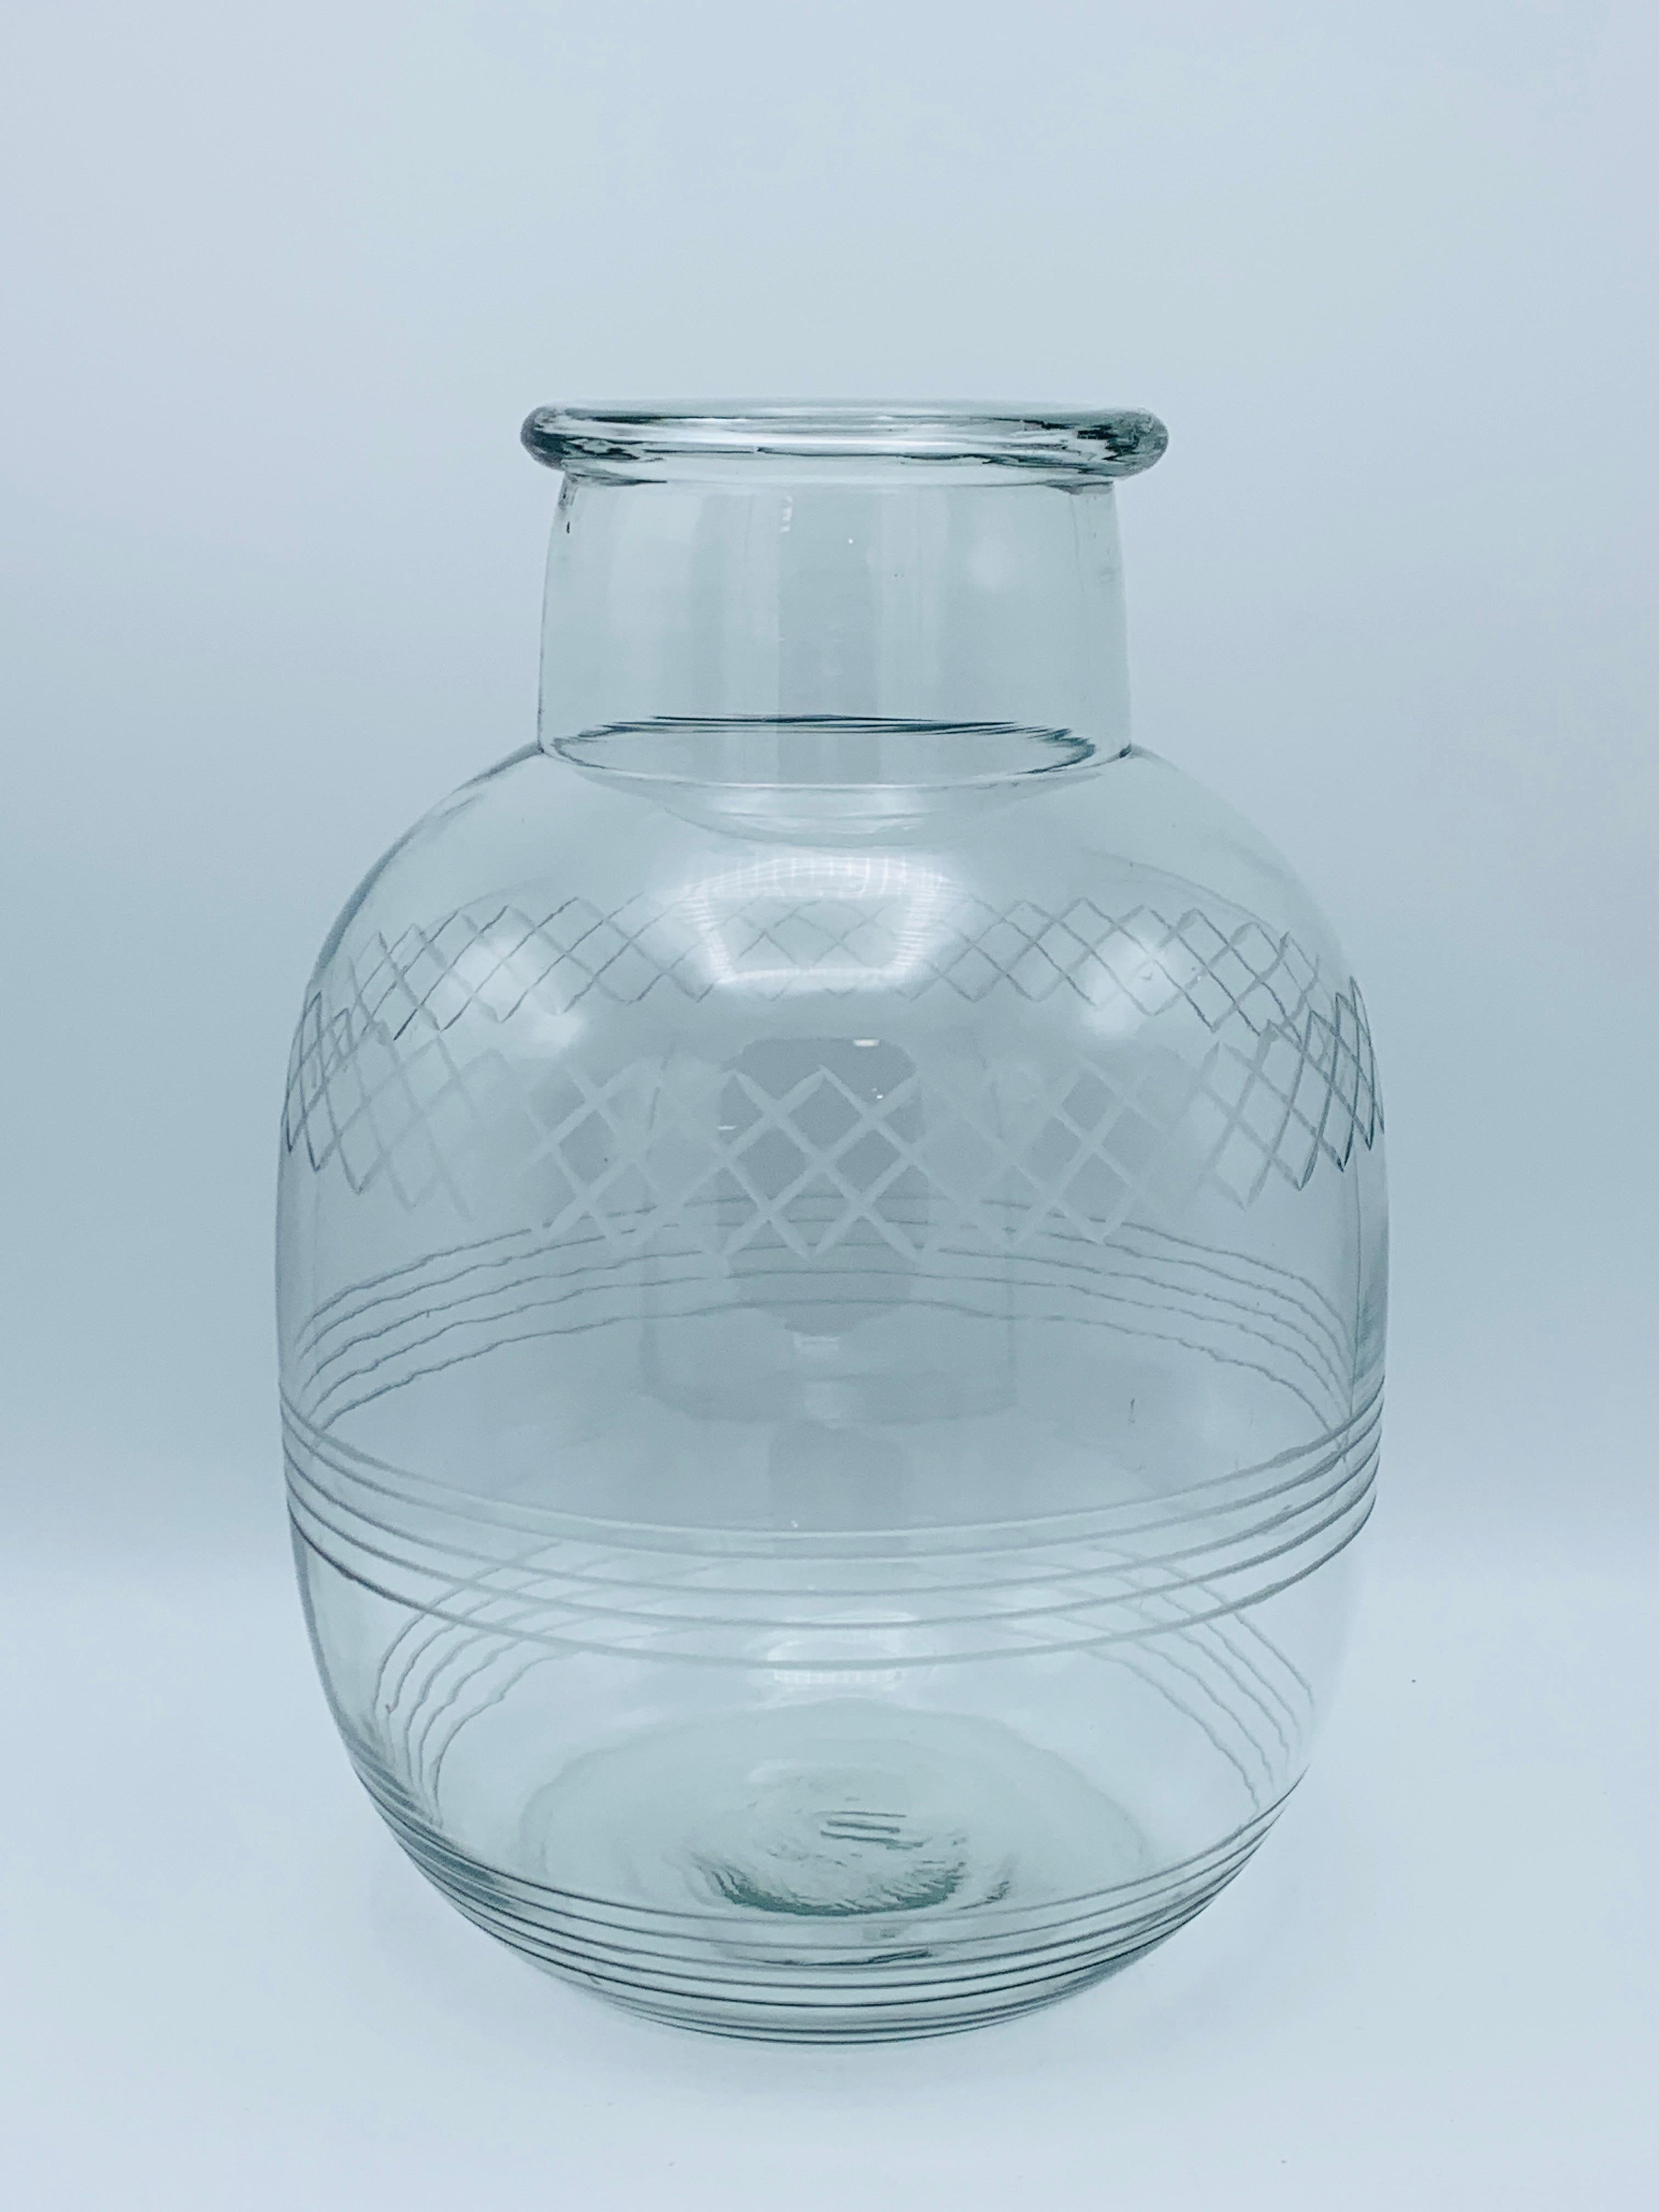 Listed is a stunning, pair of oversized, 1950s etched glass vases. The pair stand 12.88